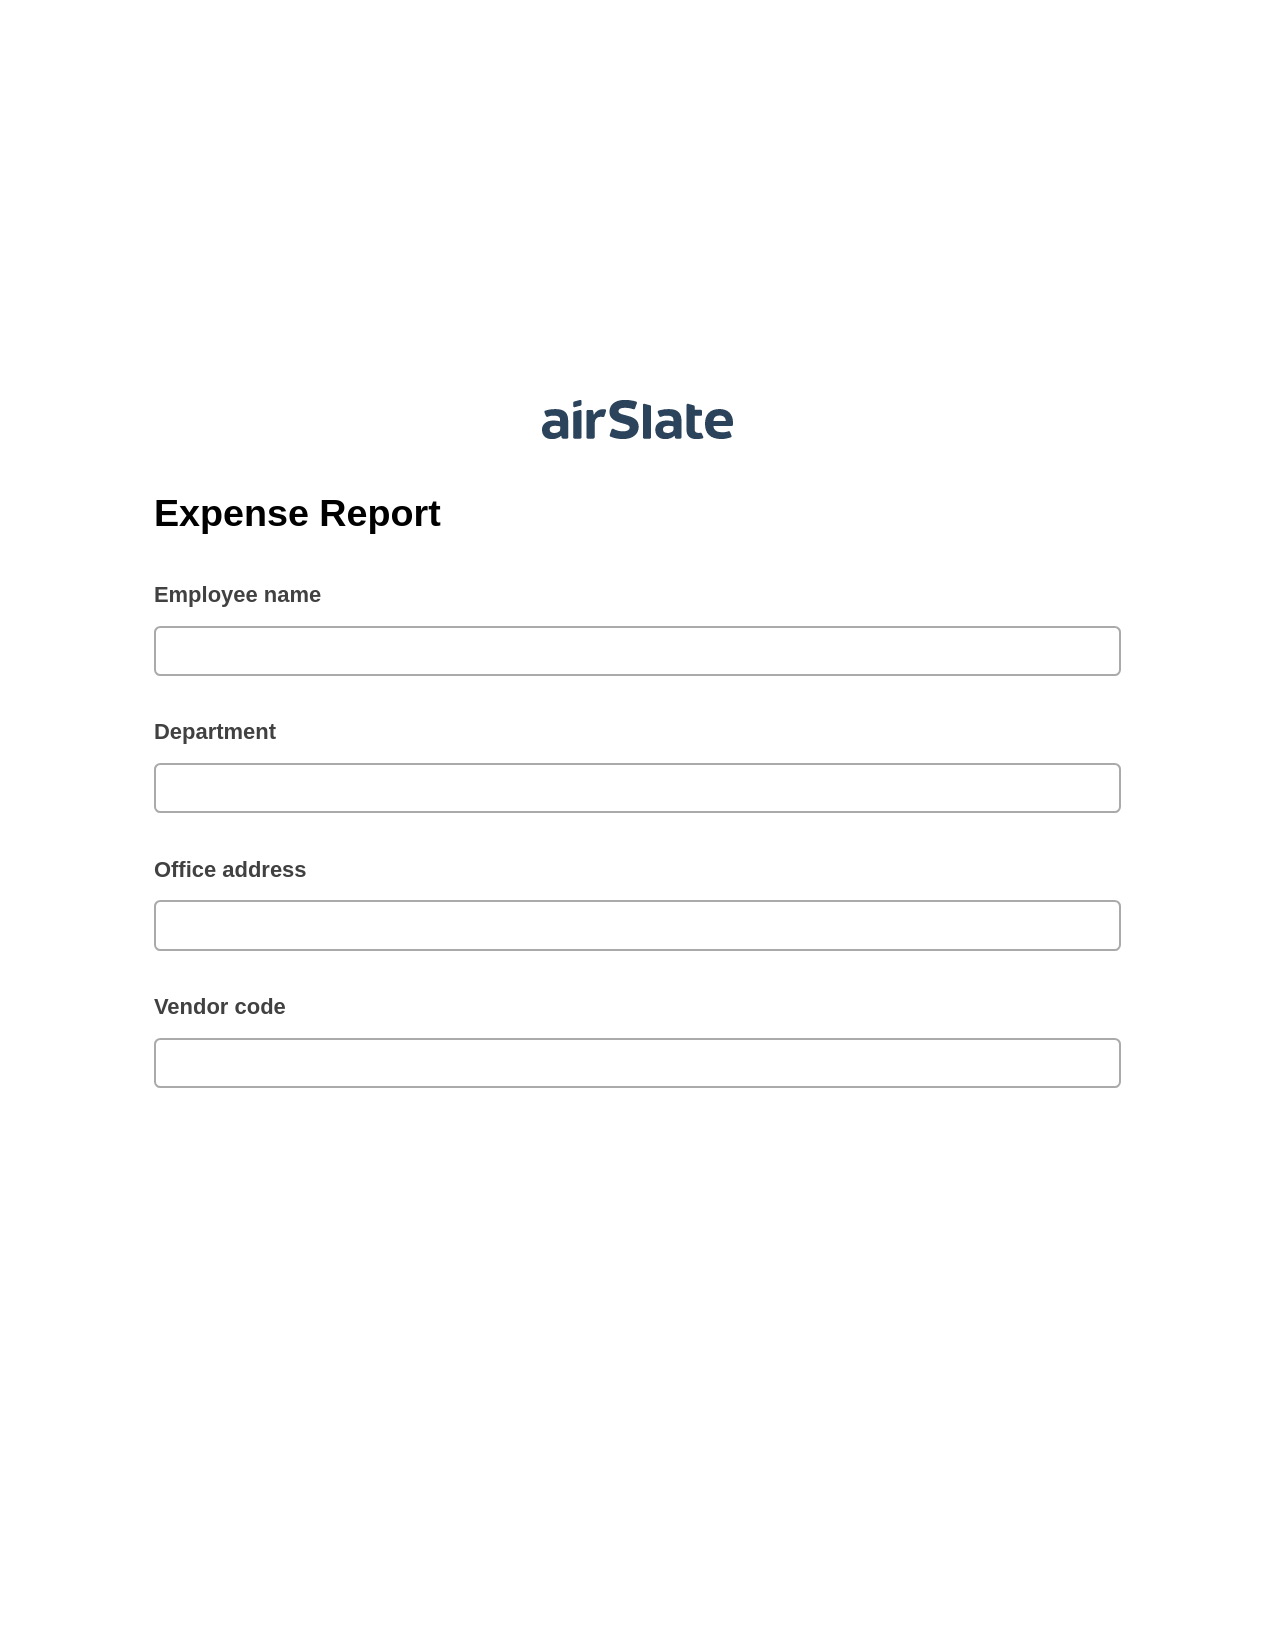 Multirole Expense Report Pre-fill from Litmos bot, Lock the slate bot, Export to Excel 365 Bot